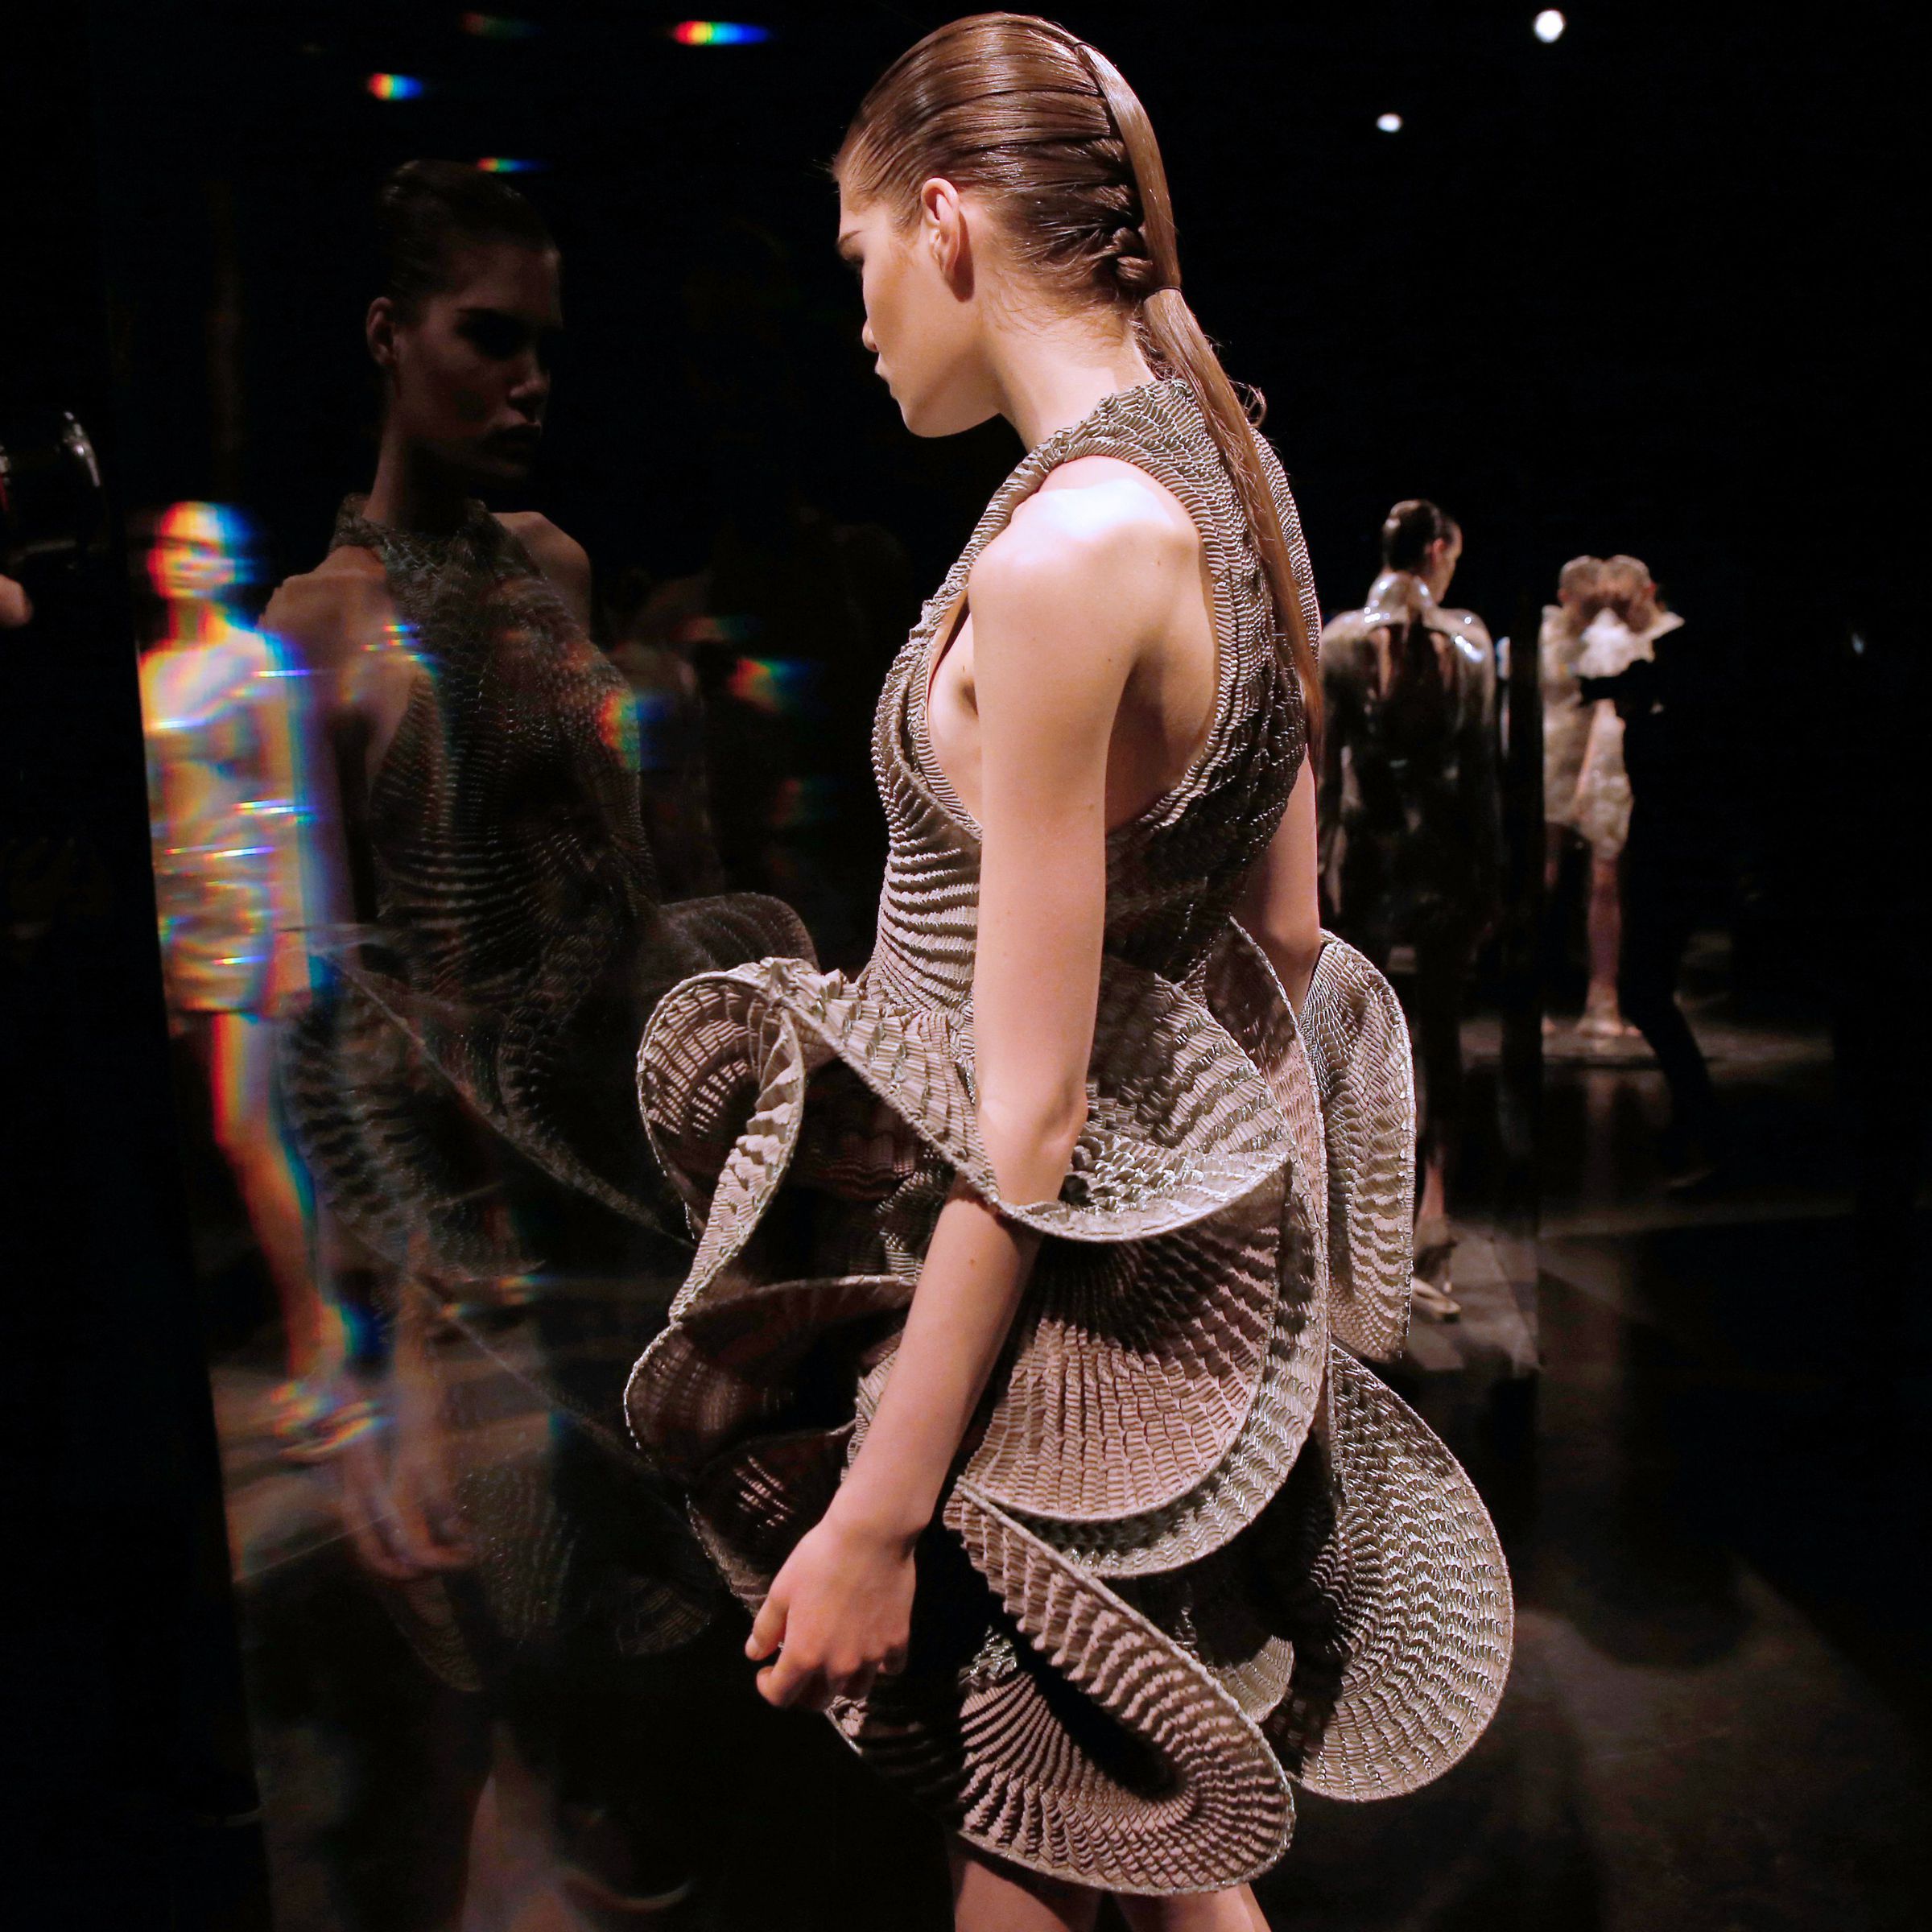 A model at Iris Van Herpen’s fall 2016 haute couture show. Photo: Patrick Kovarick/Getty Images